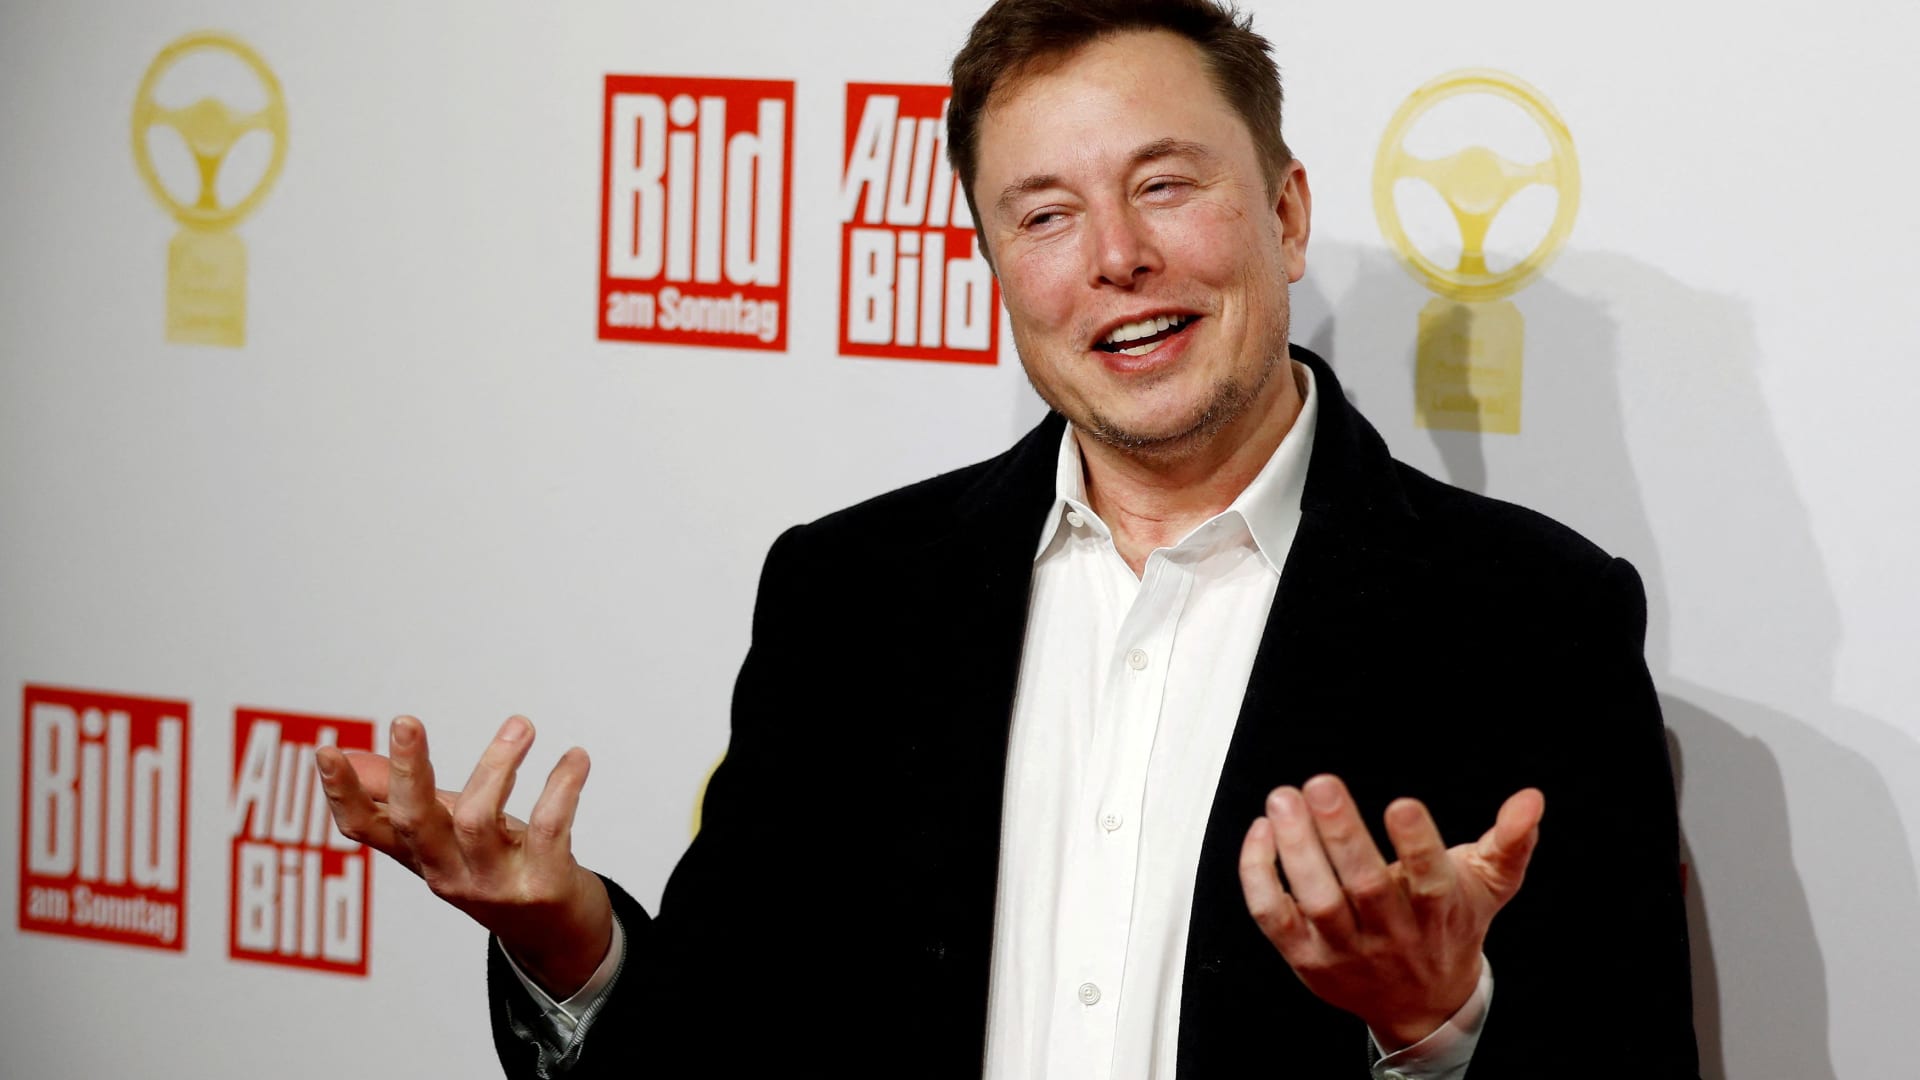 Twitter owner Elon Musk met with civil rights leaders Tuesday — here’s what happened